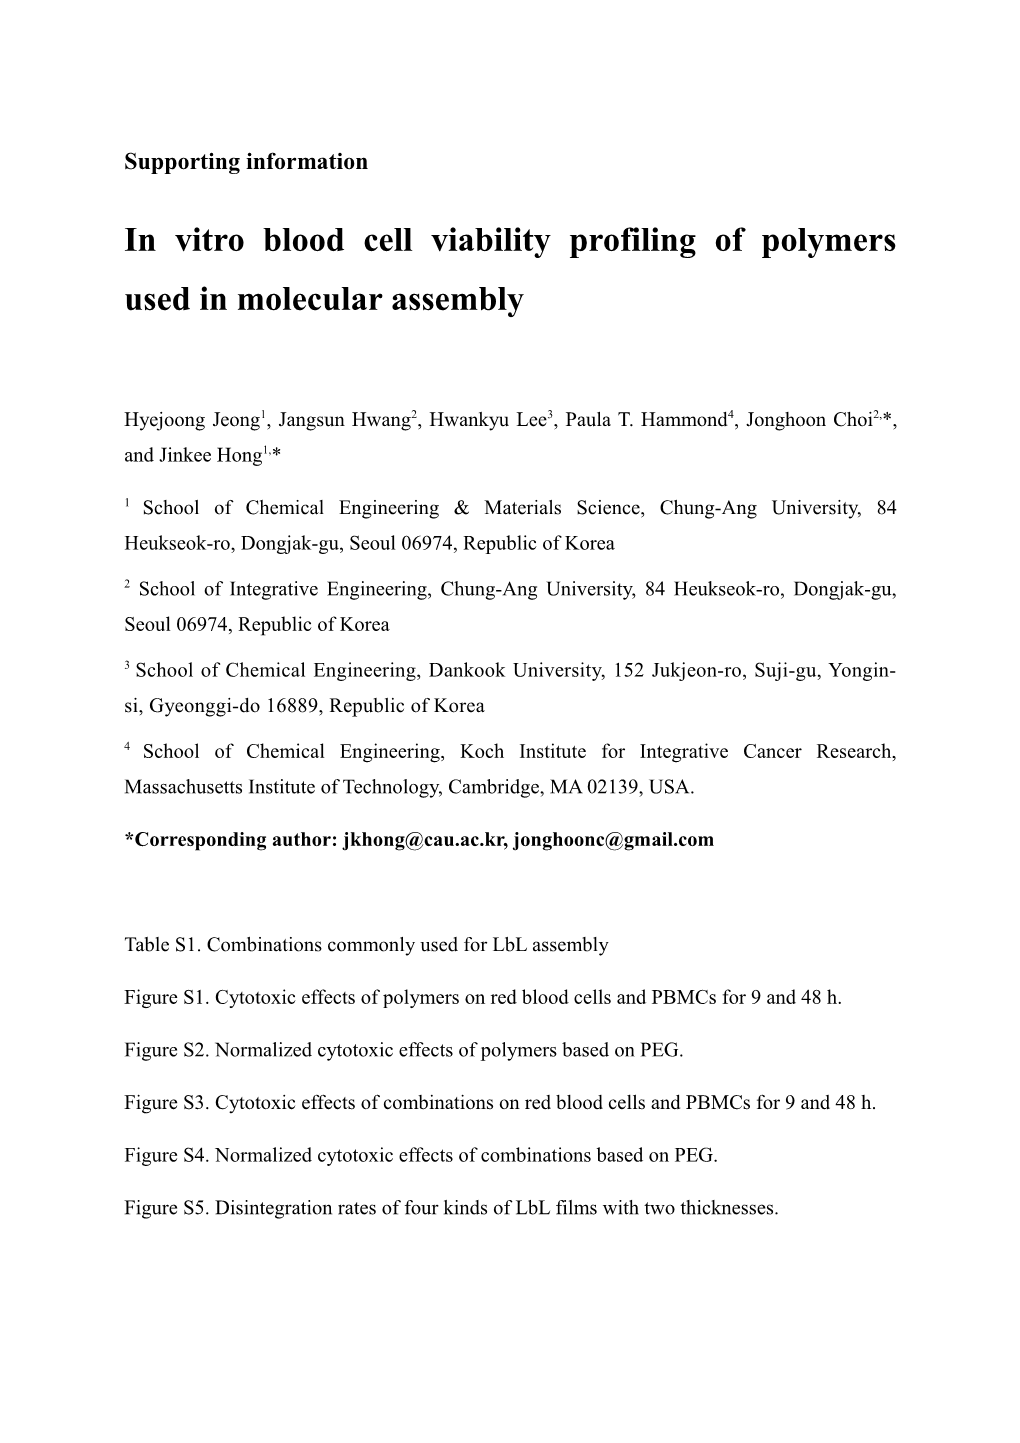 In Vitro Blood Cell Viability Profiling of Polymers Used in Molecular Assembly